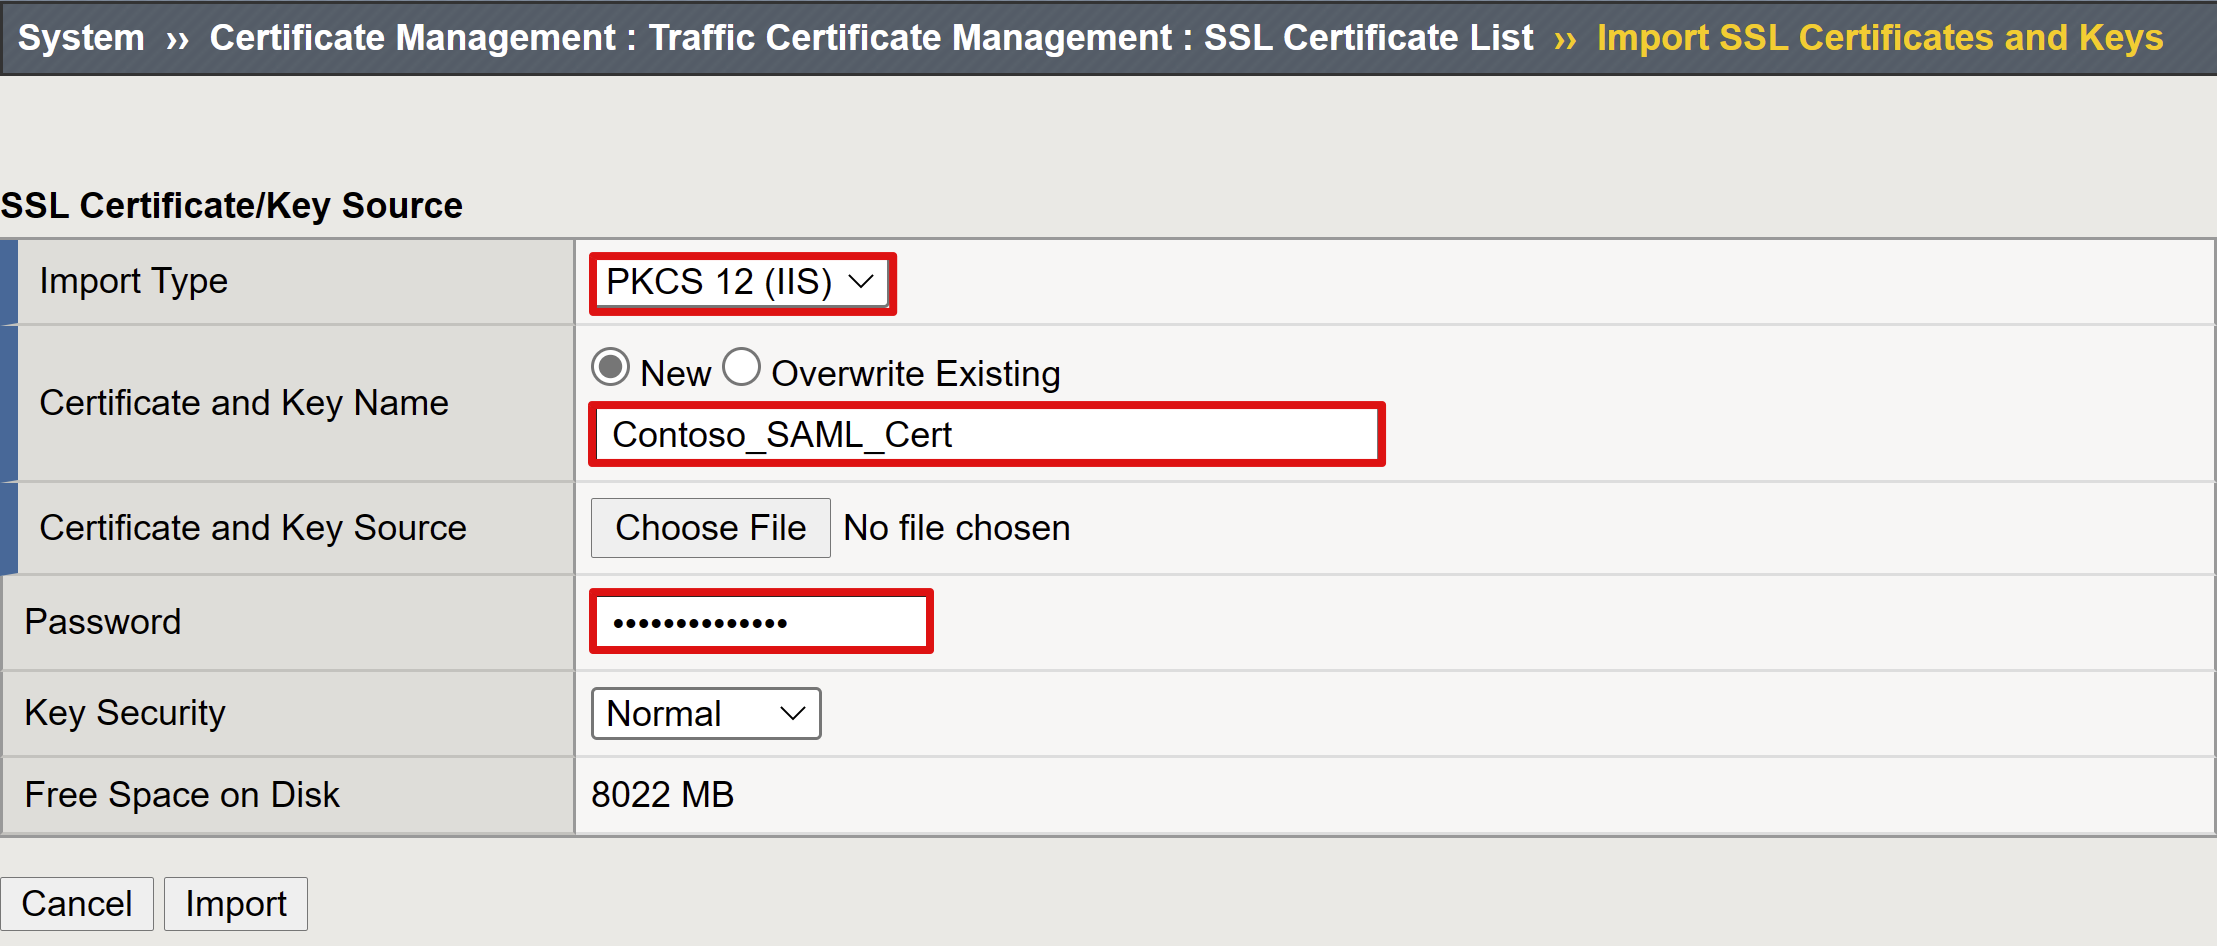 Screenshot of selections and entries for SSL Certificate Key Source.